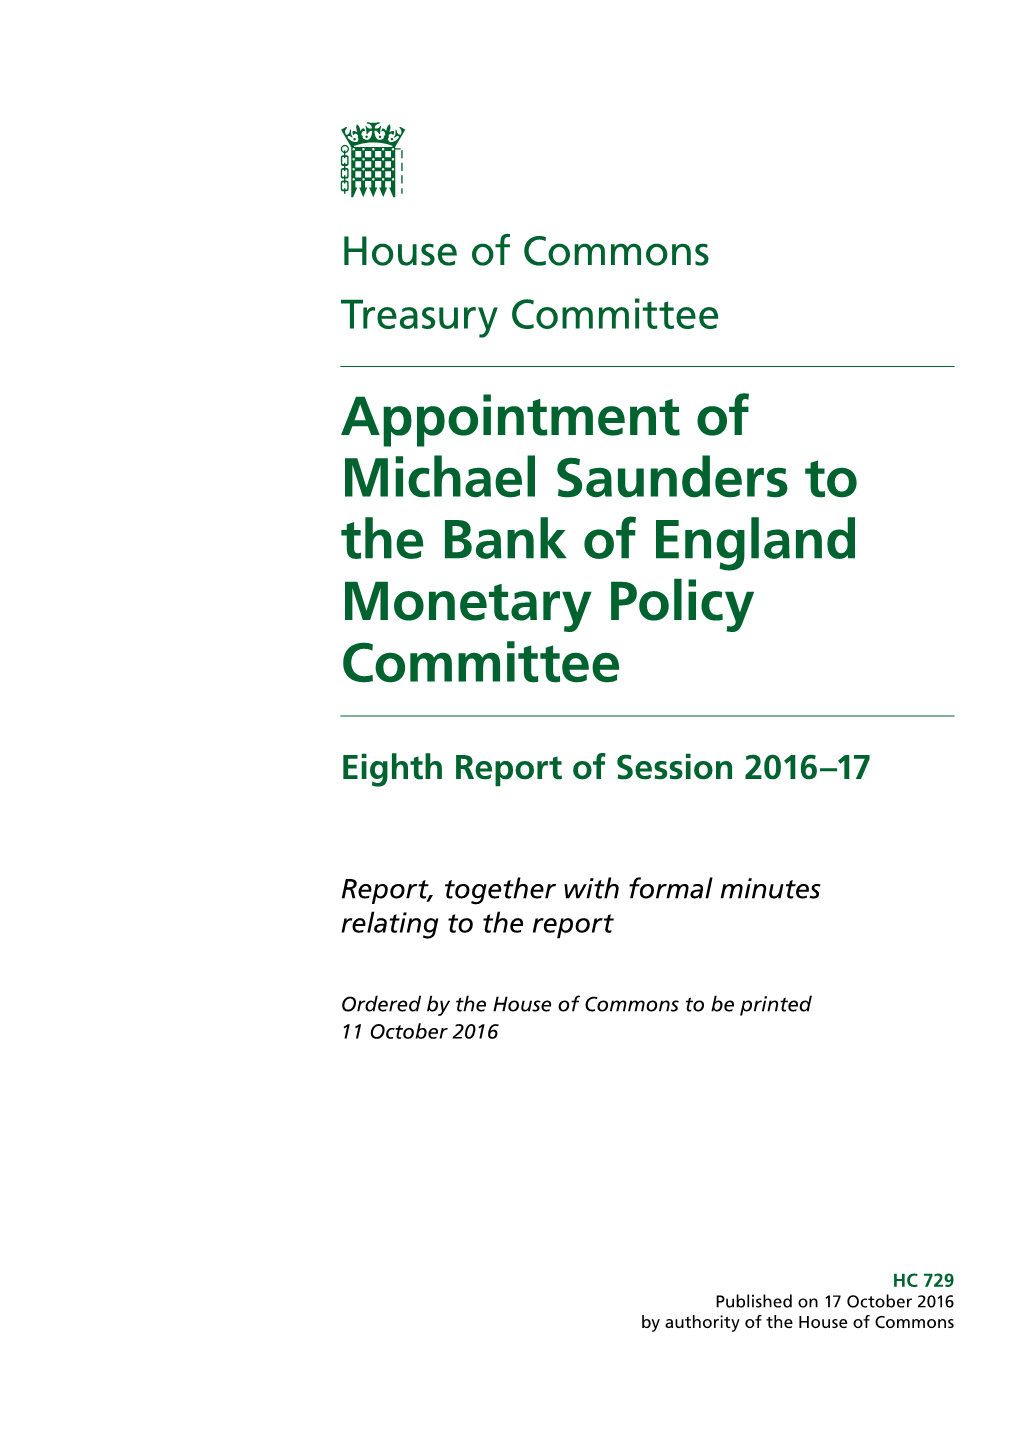 Appointment of Michael Saunders to the Bank of England Monetary Policy Committee